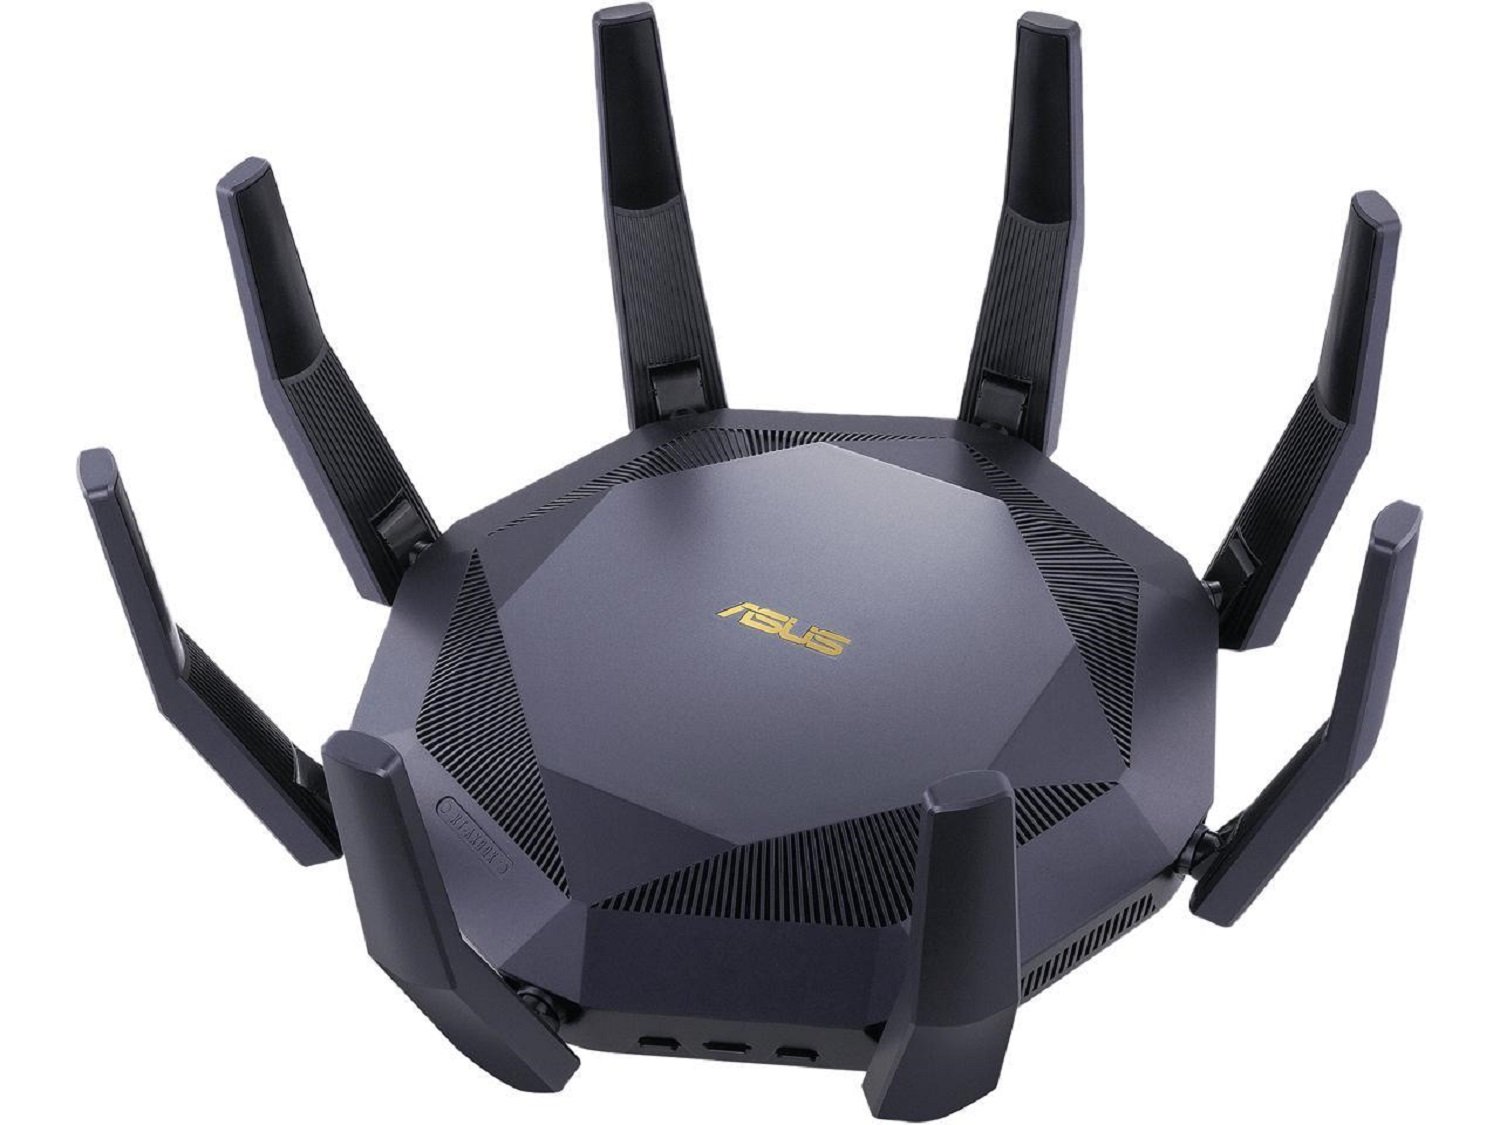 DON'T Waste your money on WiFi 6E Routers: Reyee E4 & E6 